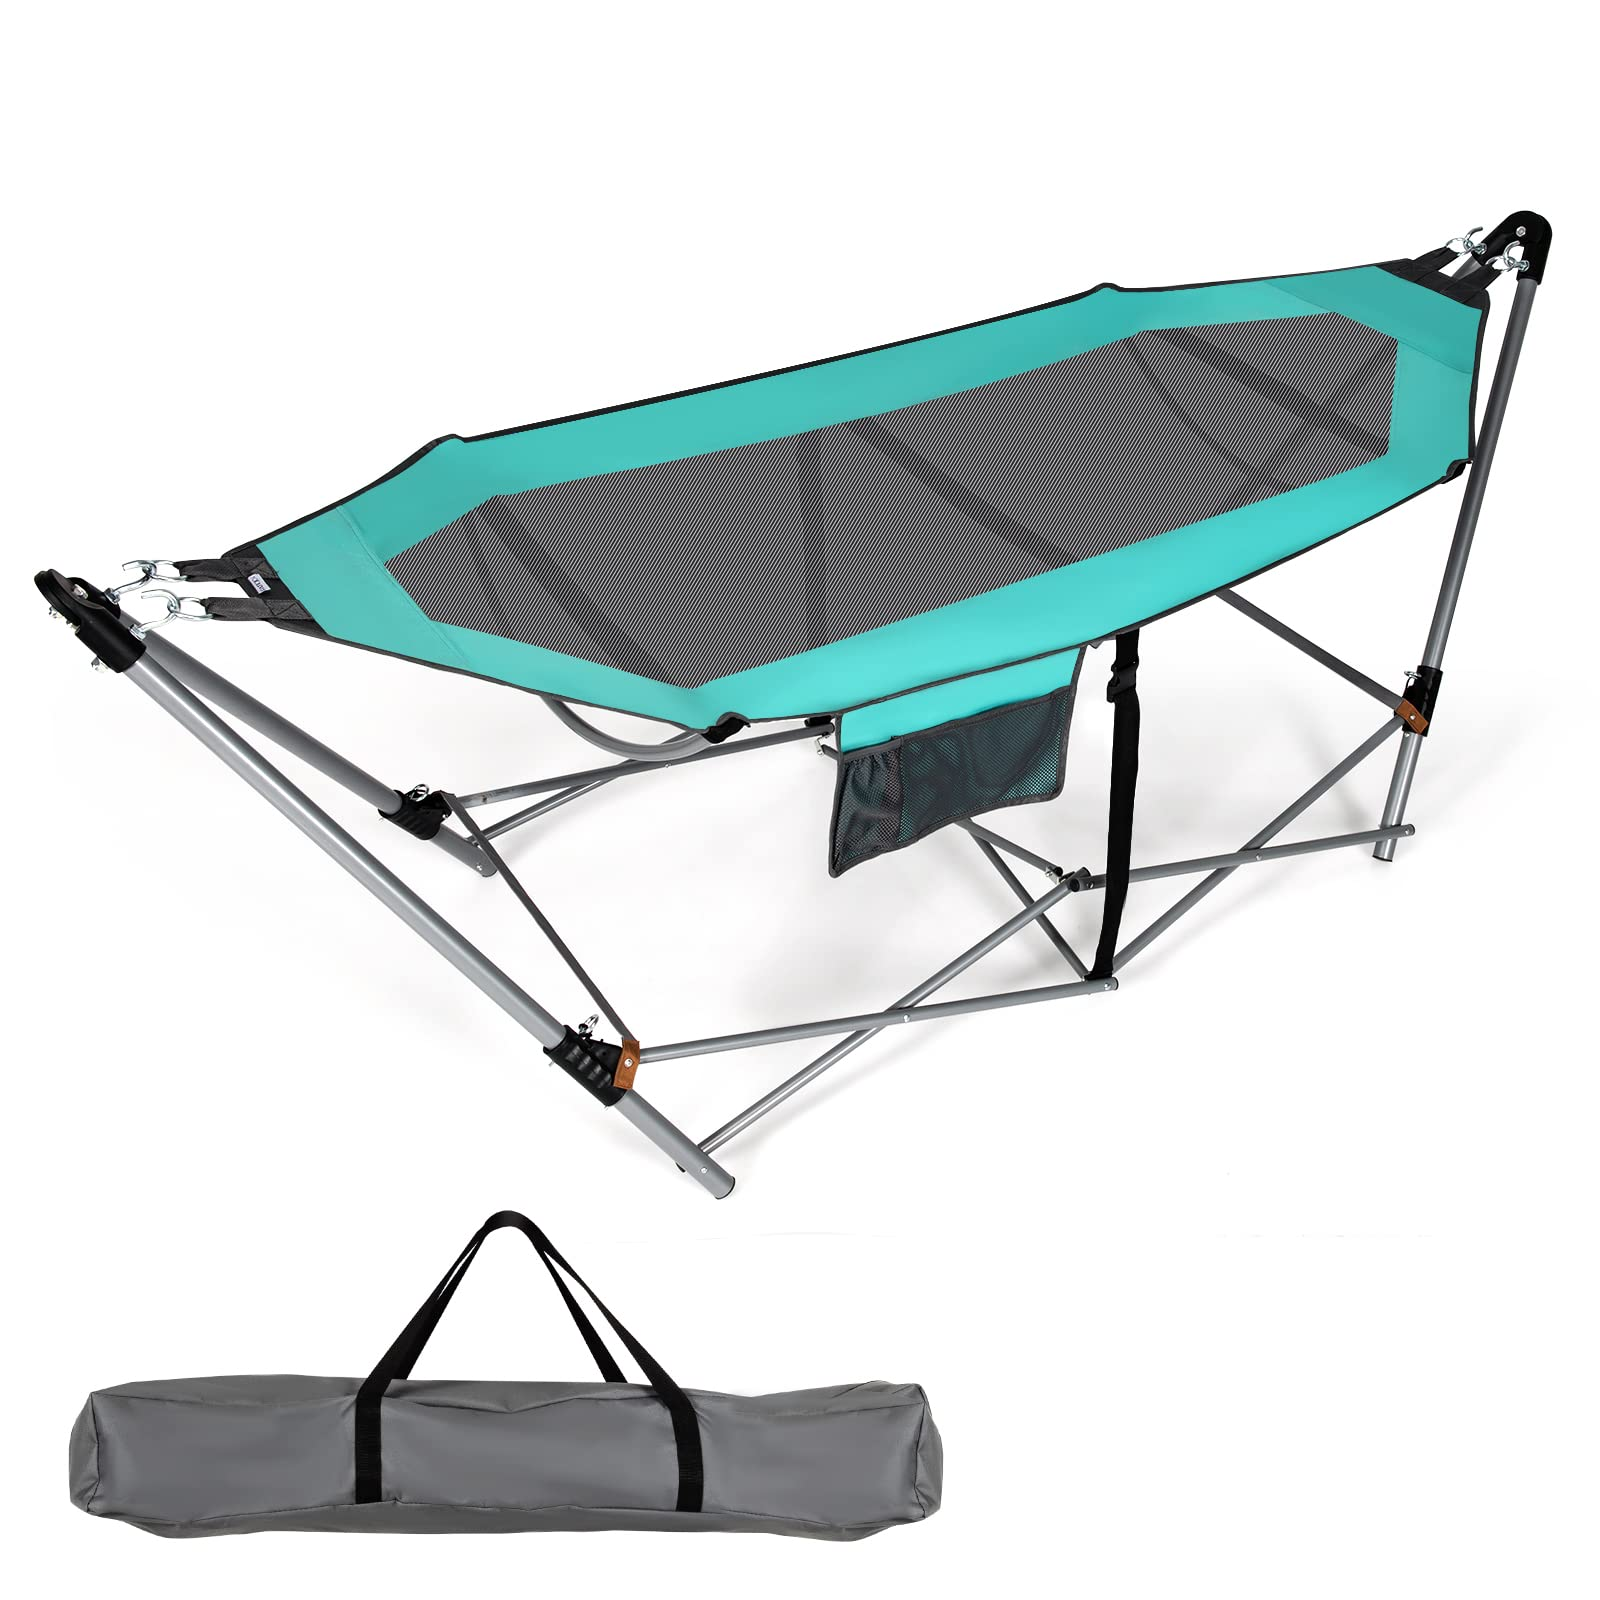 Giantex Portable Folding Hammock, Lounge Camping Bed with Hammock Stand